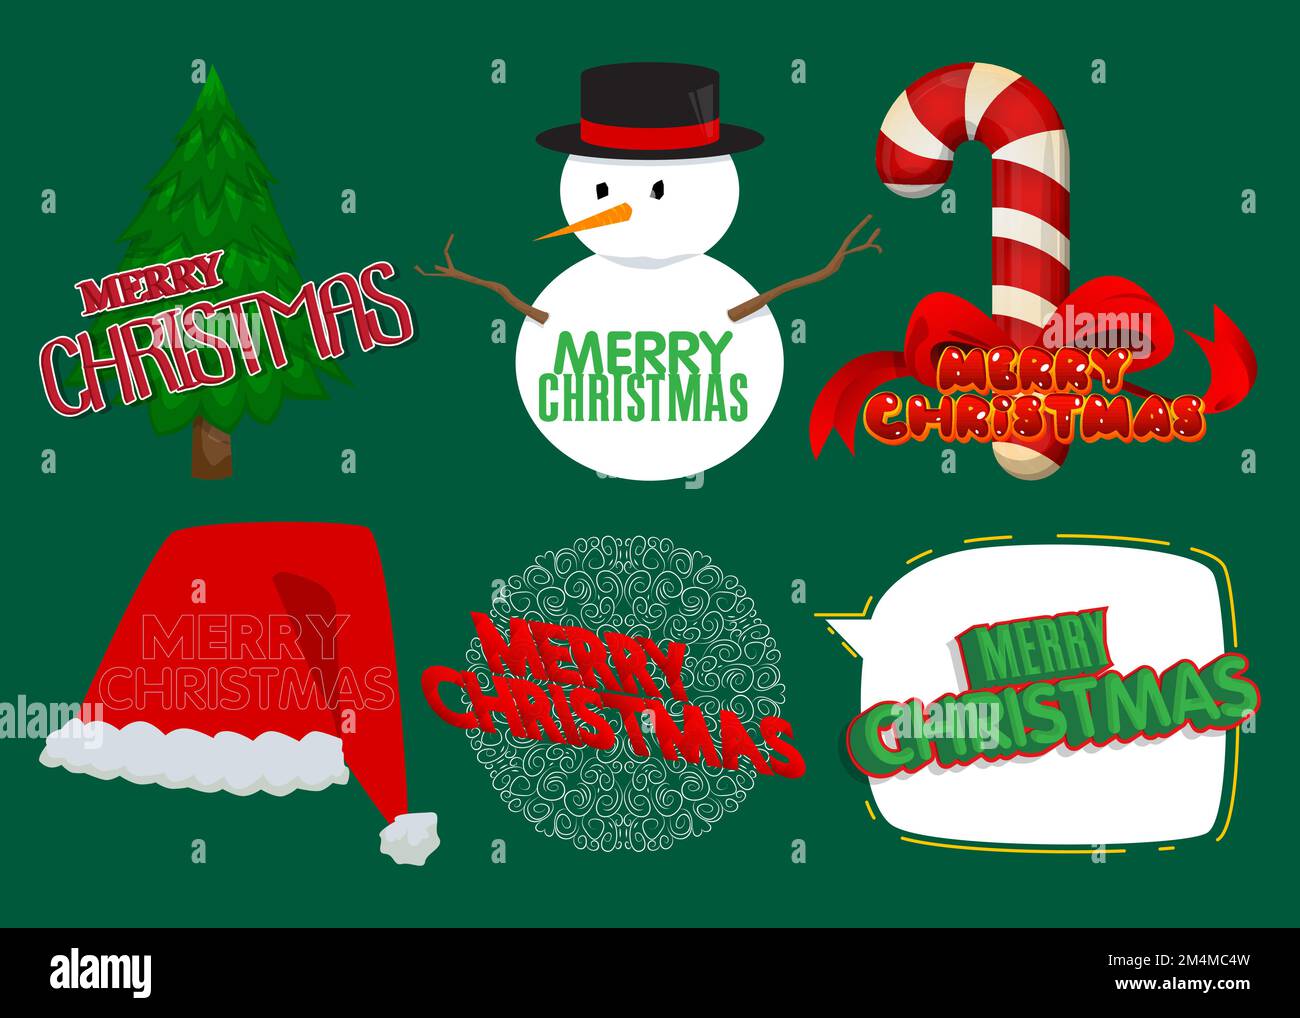 Merry Christmas sticker collection. Holiday icon set. Stock Vector